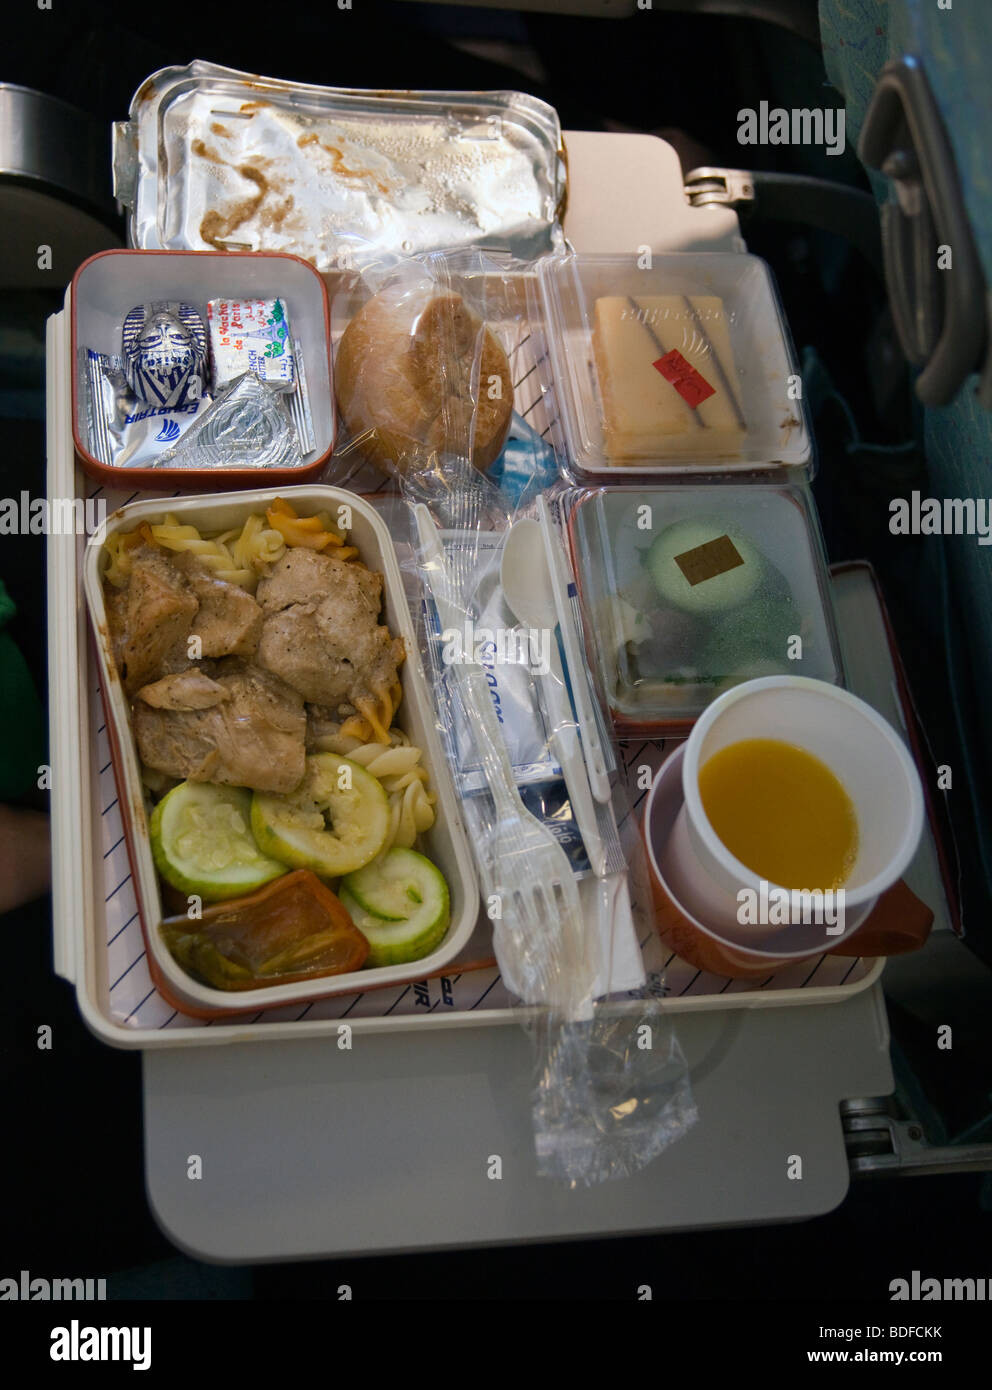 airline meal, Egypt Air flight Stock Photo